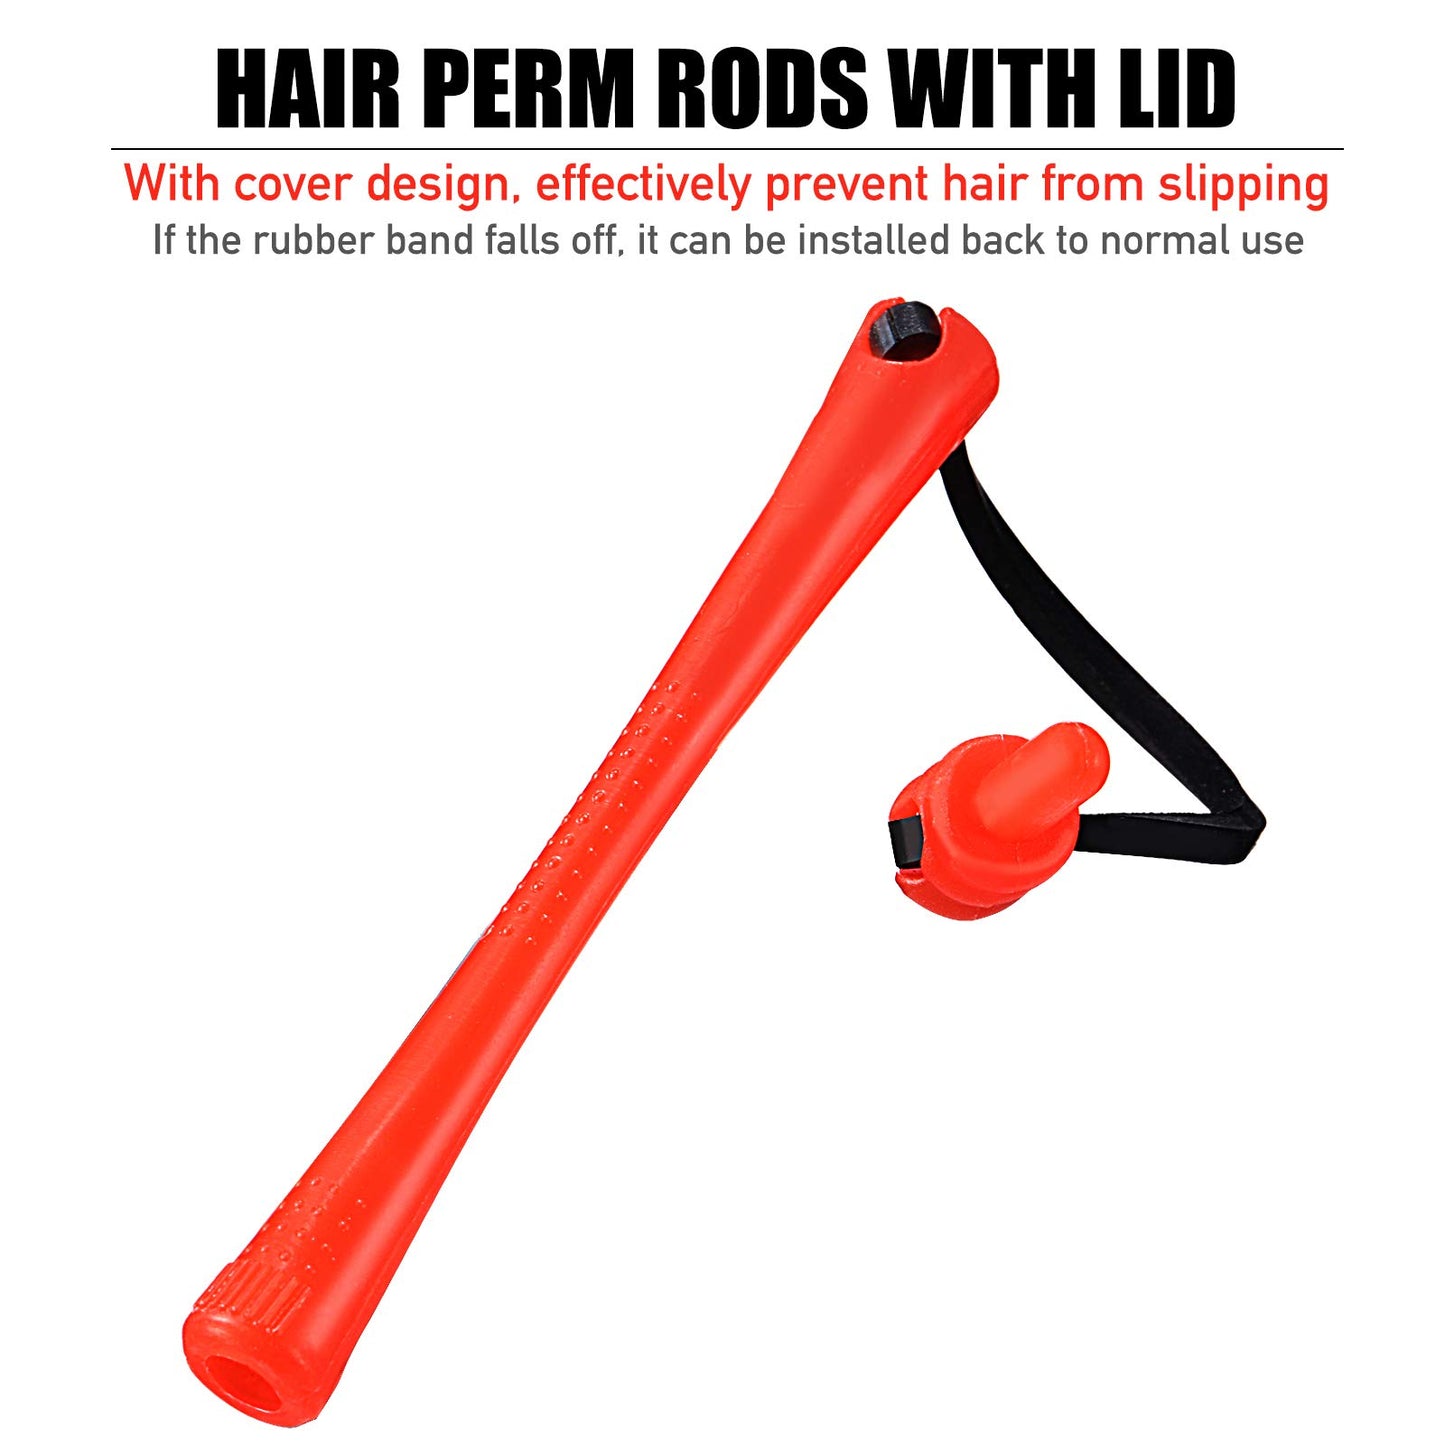 84 Pieces Hair Perm Rods Hair Curling Rollers Perming Rods Curlers Cold Wave Rods for Hairdressing Styling Tools (Red,0.2 Inch)